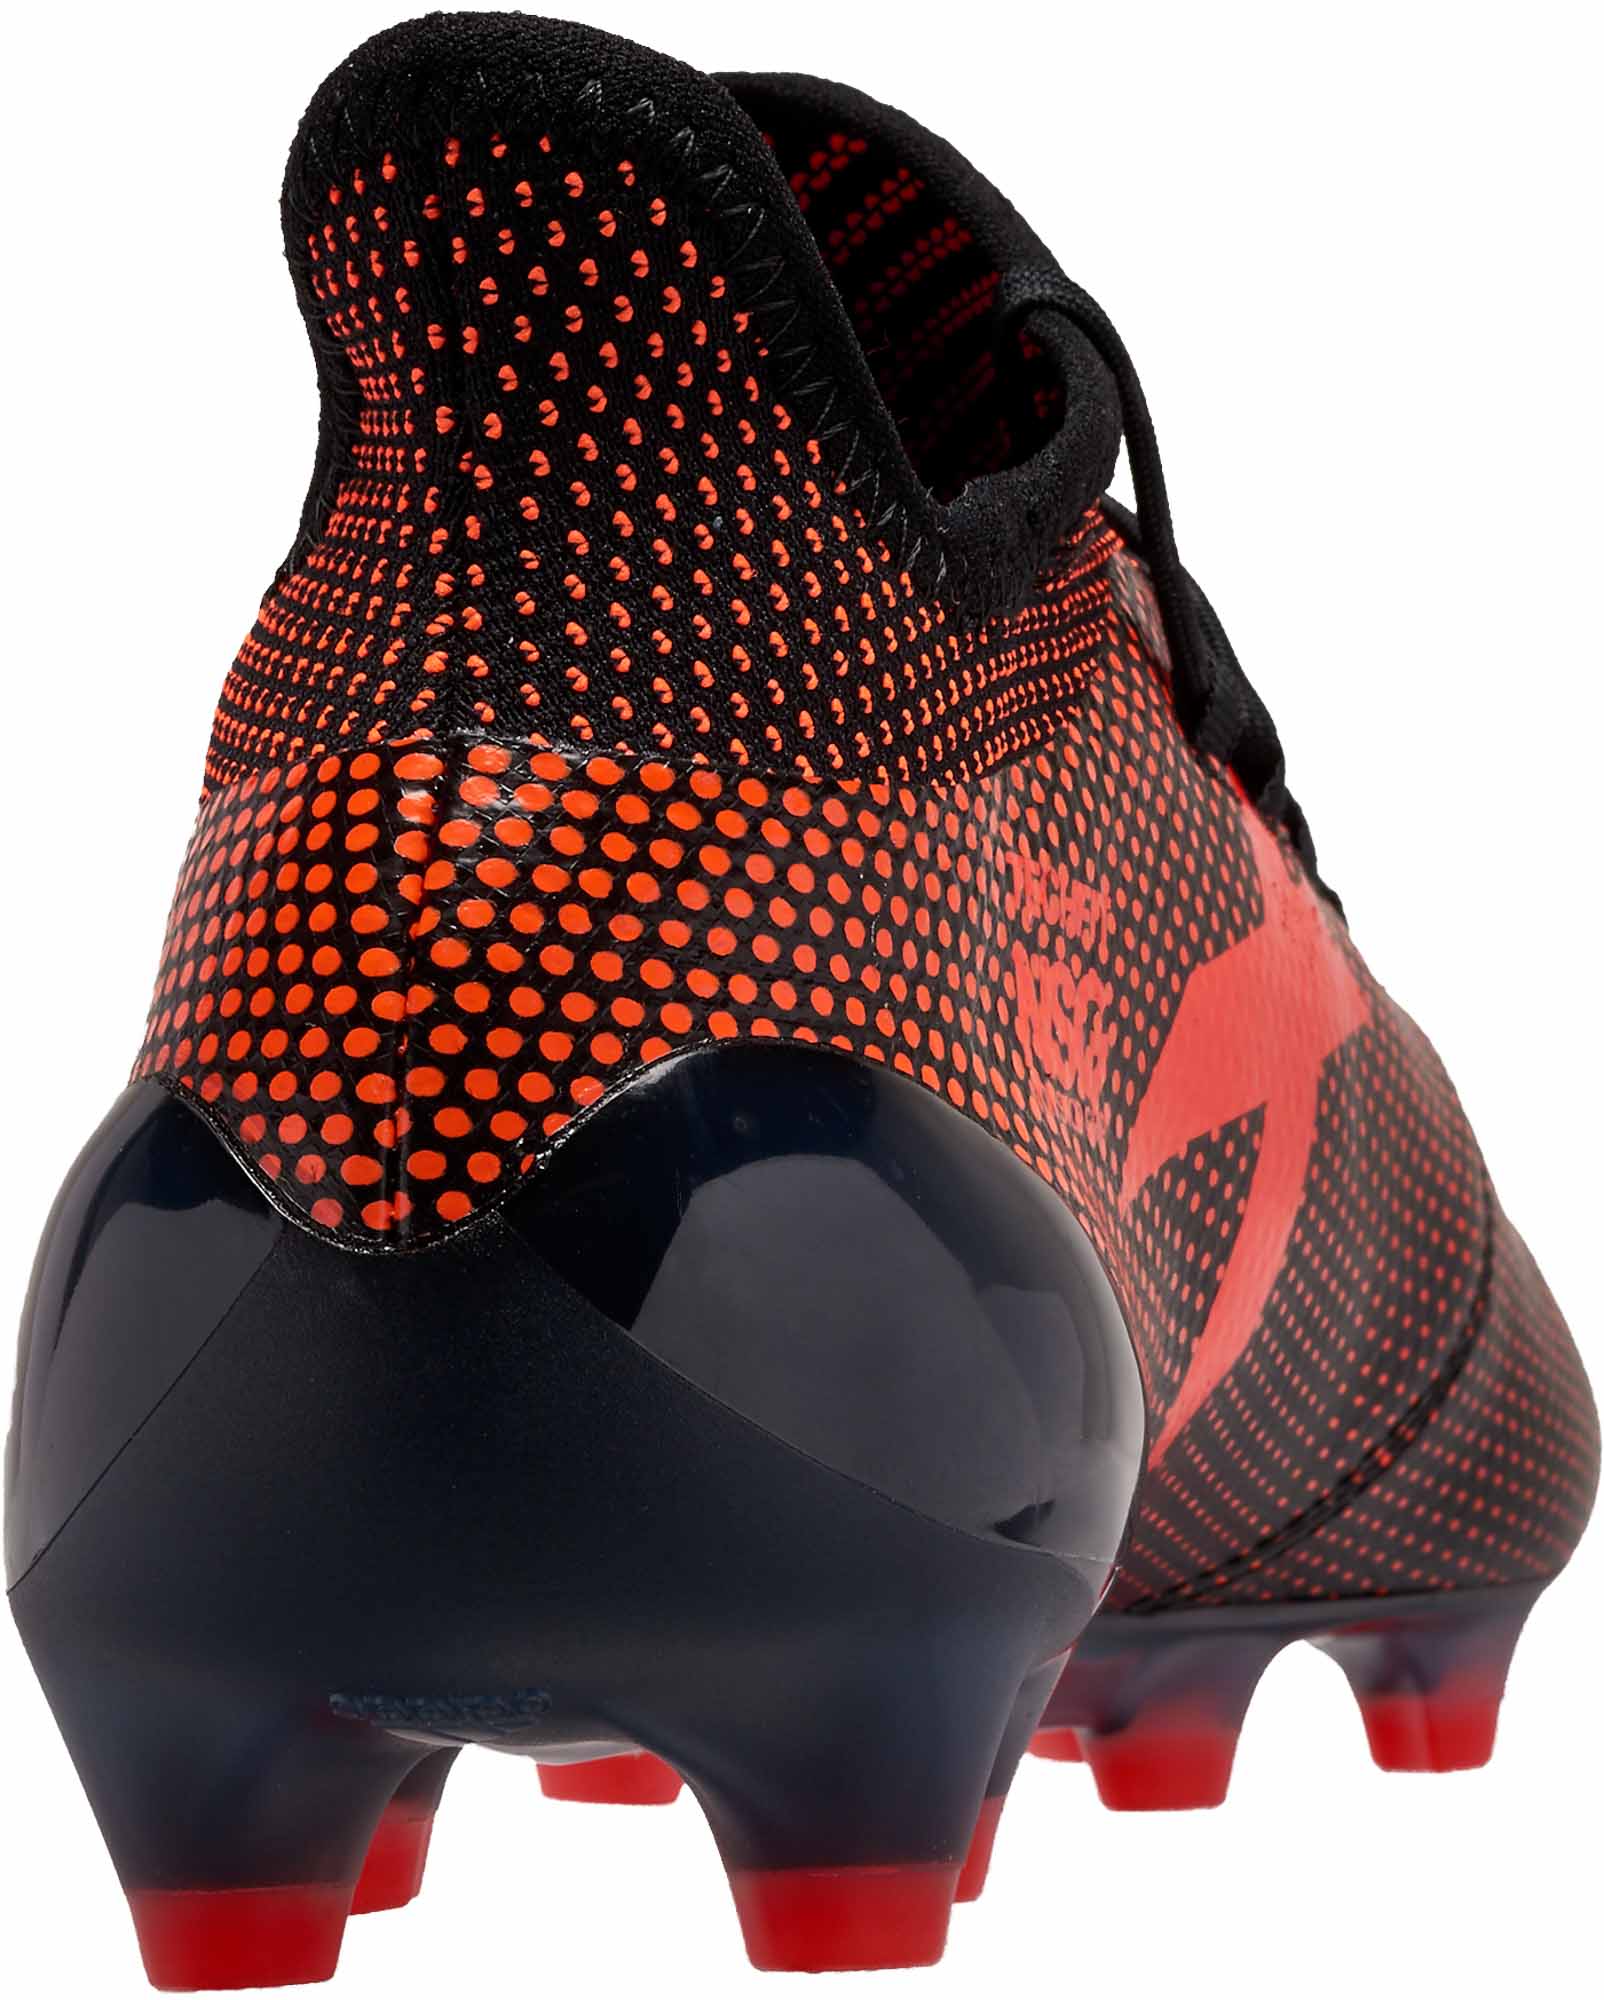 adidas x 17.1 red and black